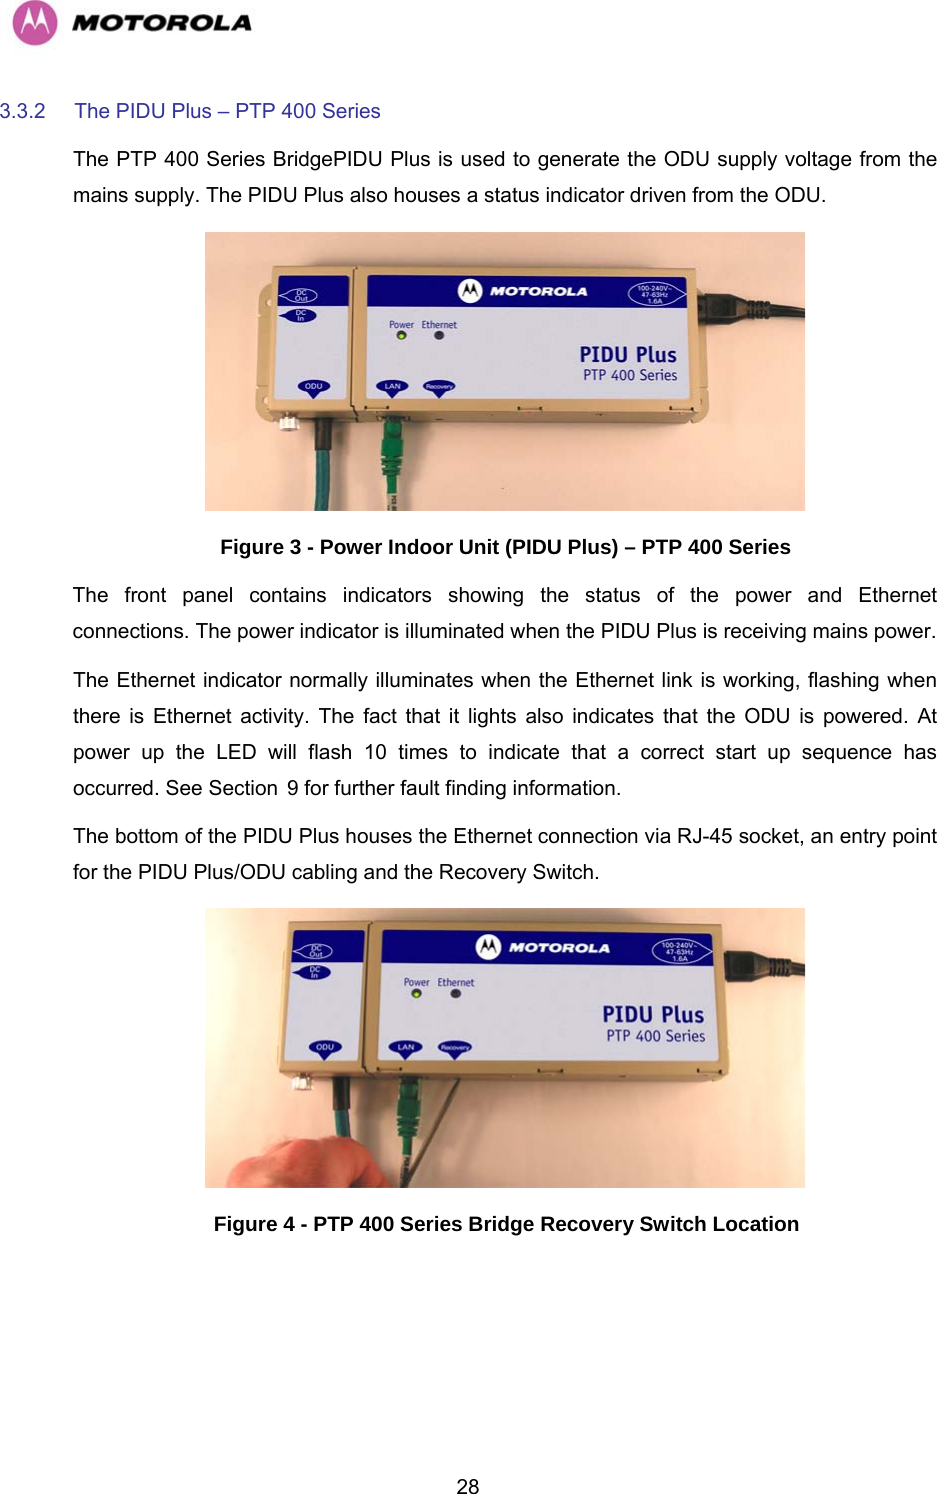   283.3.2  The PIDU Plus – PTP 400 Series  The PTP 400 Series BridgePIDU Plus is used to generate the ODU supply voltage from the mains supply. The PIDU Plus also houses a status indicator driven from the ODU.  Figure 3 - Power Indoor Unit (PIDU Plus) – PTP 400 Series  The front panel contains indicators showing the status of the power and Ethernet connections. The power indicator is illuminated when the PIDU Plus is receiving mains power. The Ethernet indicator normally illuminates when the Ethernet link is working, flashing when there is Ethernet activity. The fact that it lights also indicates that the ODU is powered. At power up the LED will flash 10 times to indicate that a correct start up sequence has occurred. See Section H9 for further fault finding information.  The bottom of the PIDU Plus houses the Ethernet connection via RJ-45 socket, an entry point for the PIDU Plus/ODU cabling and the Recovery Switch.  Figure 4 - PTP 400 Series Bridge Recovery Switch Location 